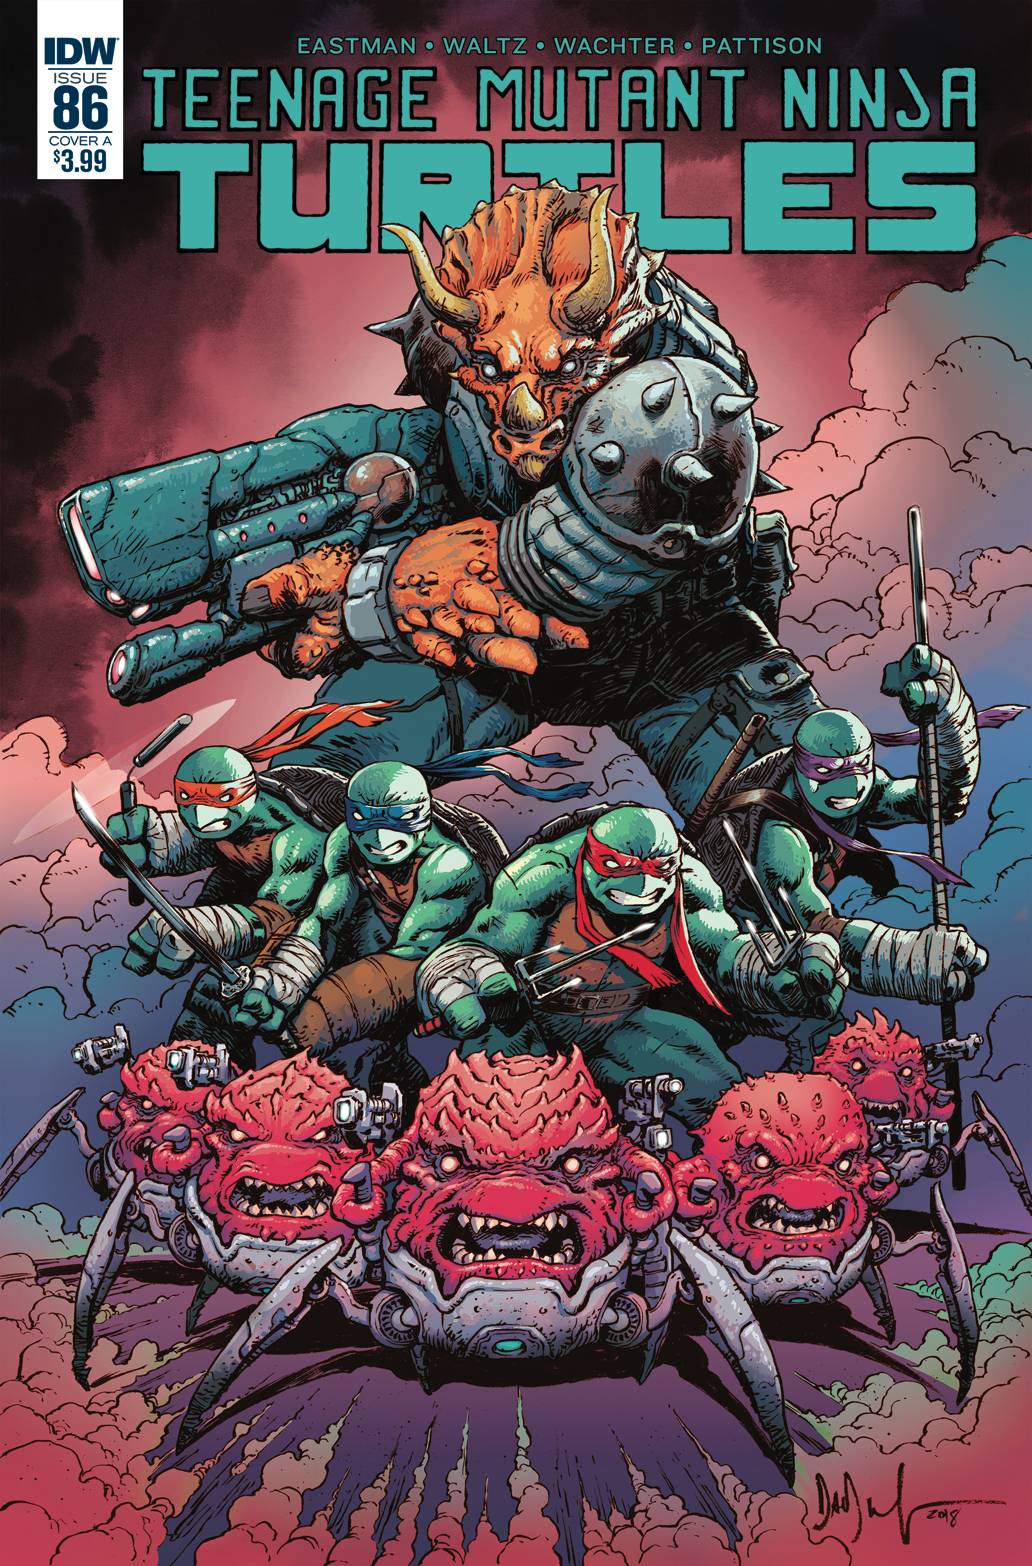 Teenage Mutant Ninja Turtles Ongoing #86 Cover A Wachter (2011)